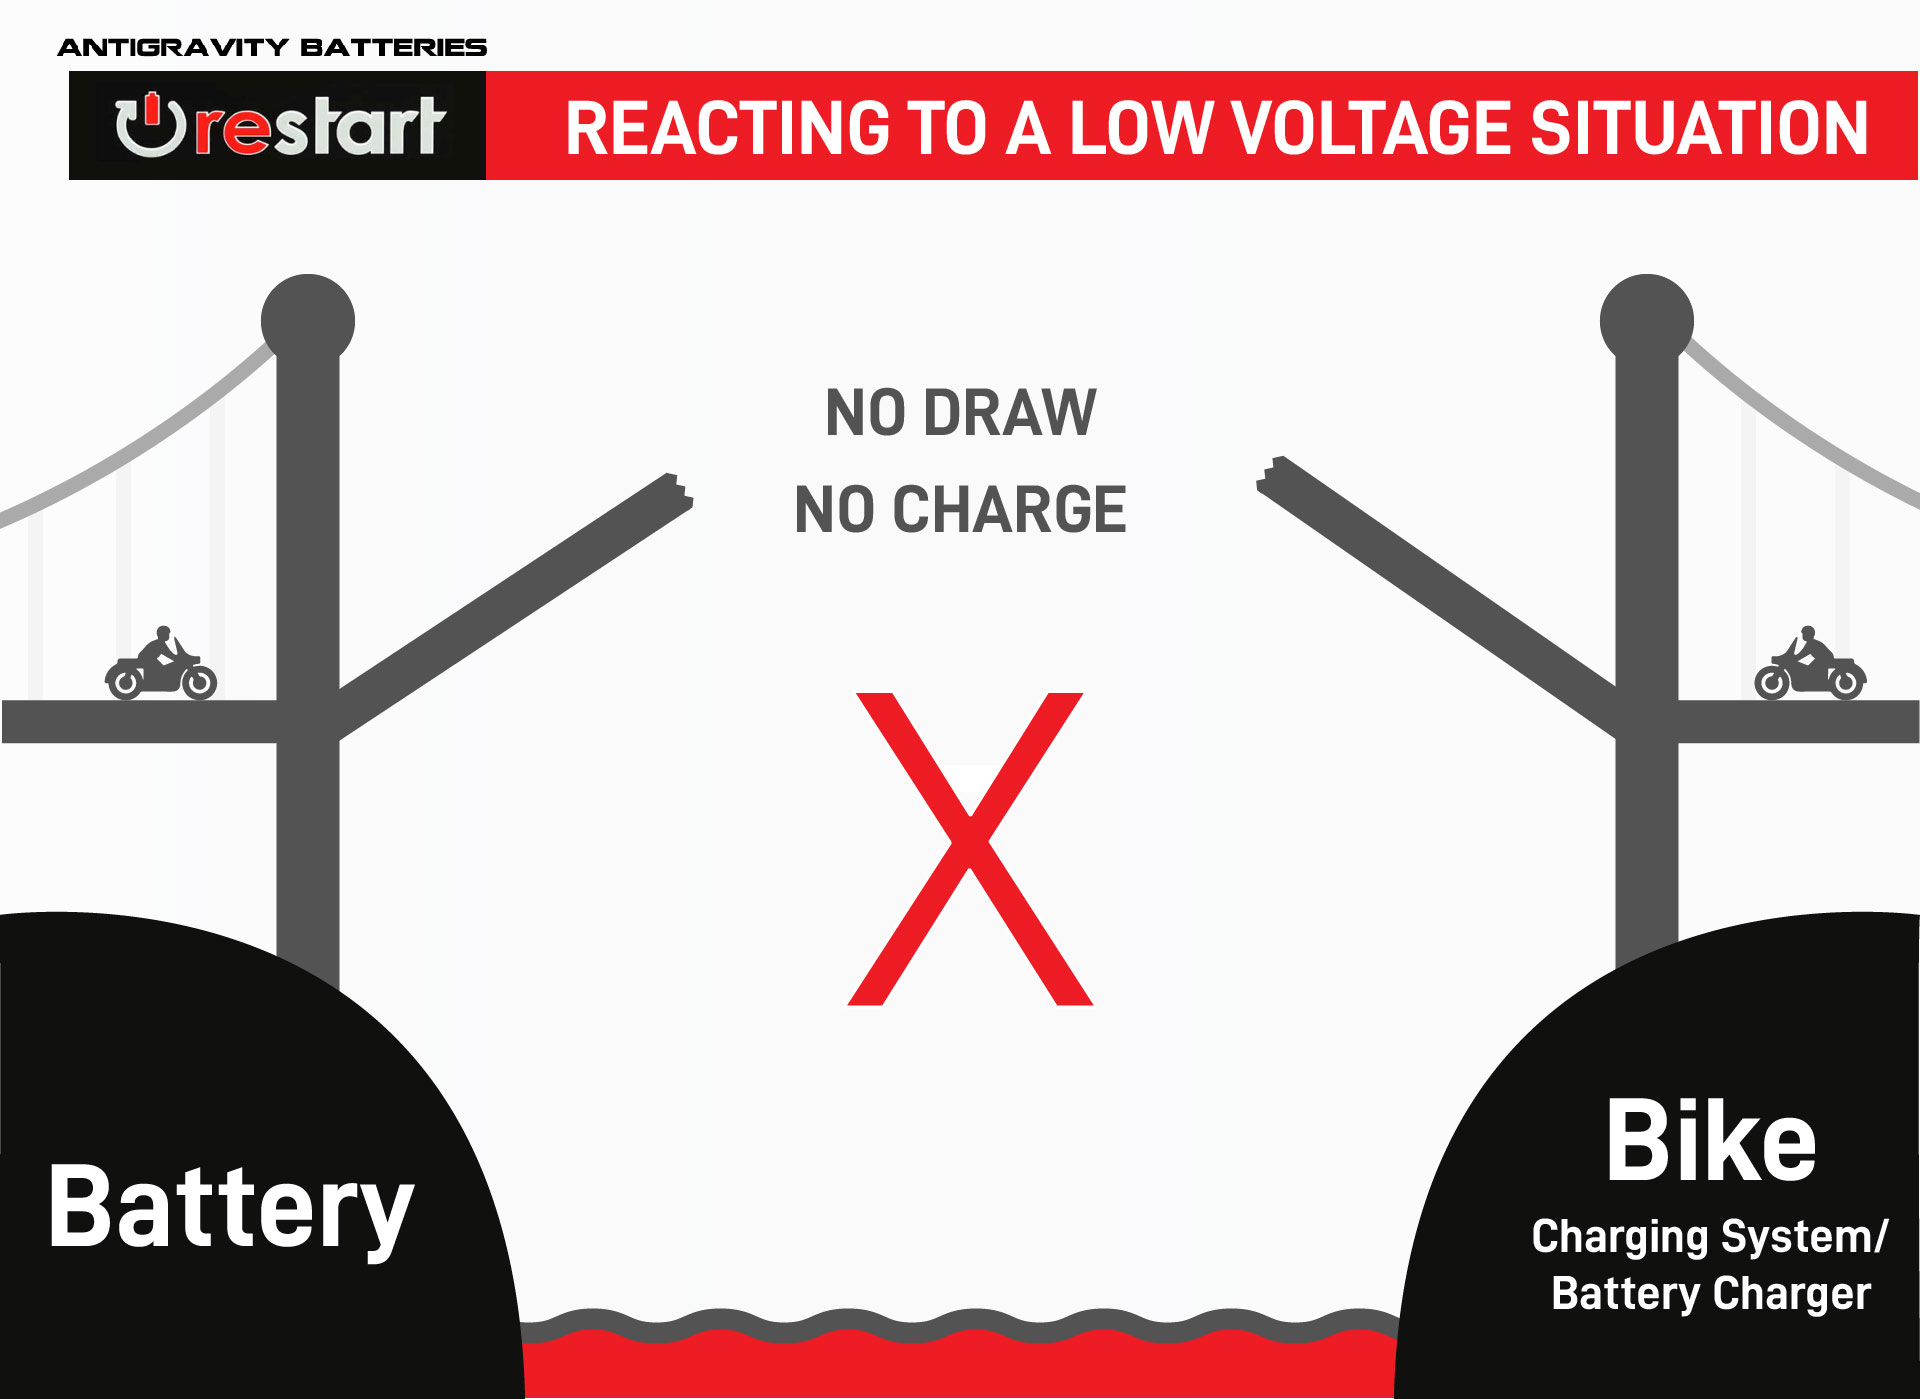 Reacting to A Low Voltage Situation